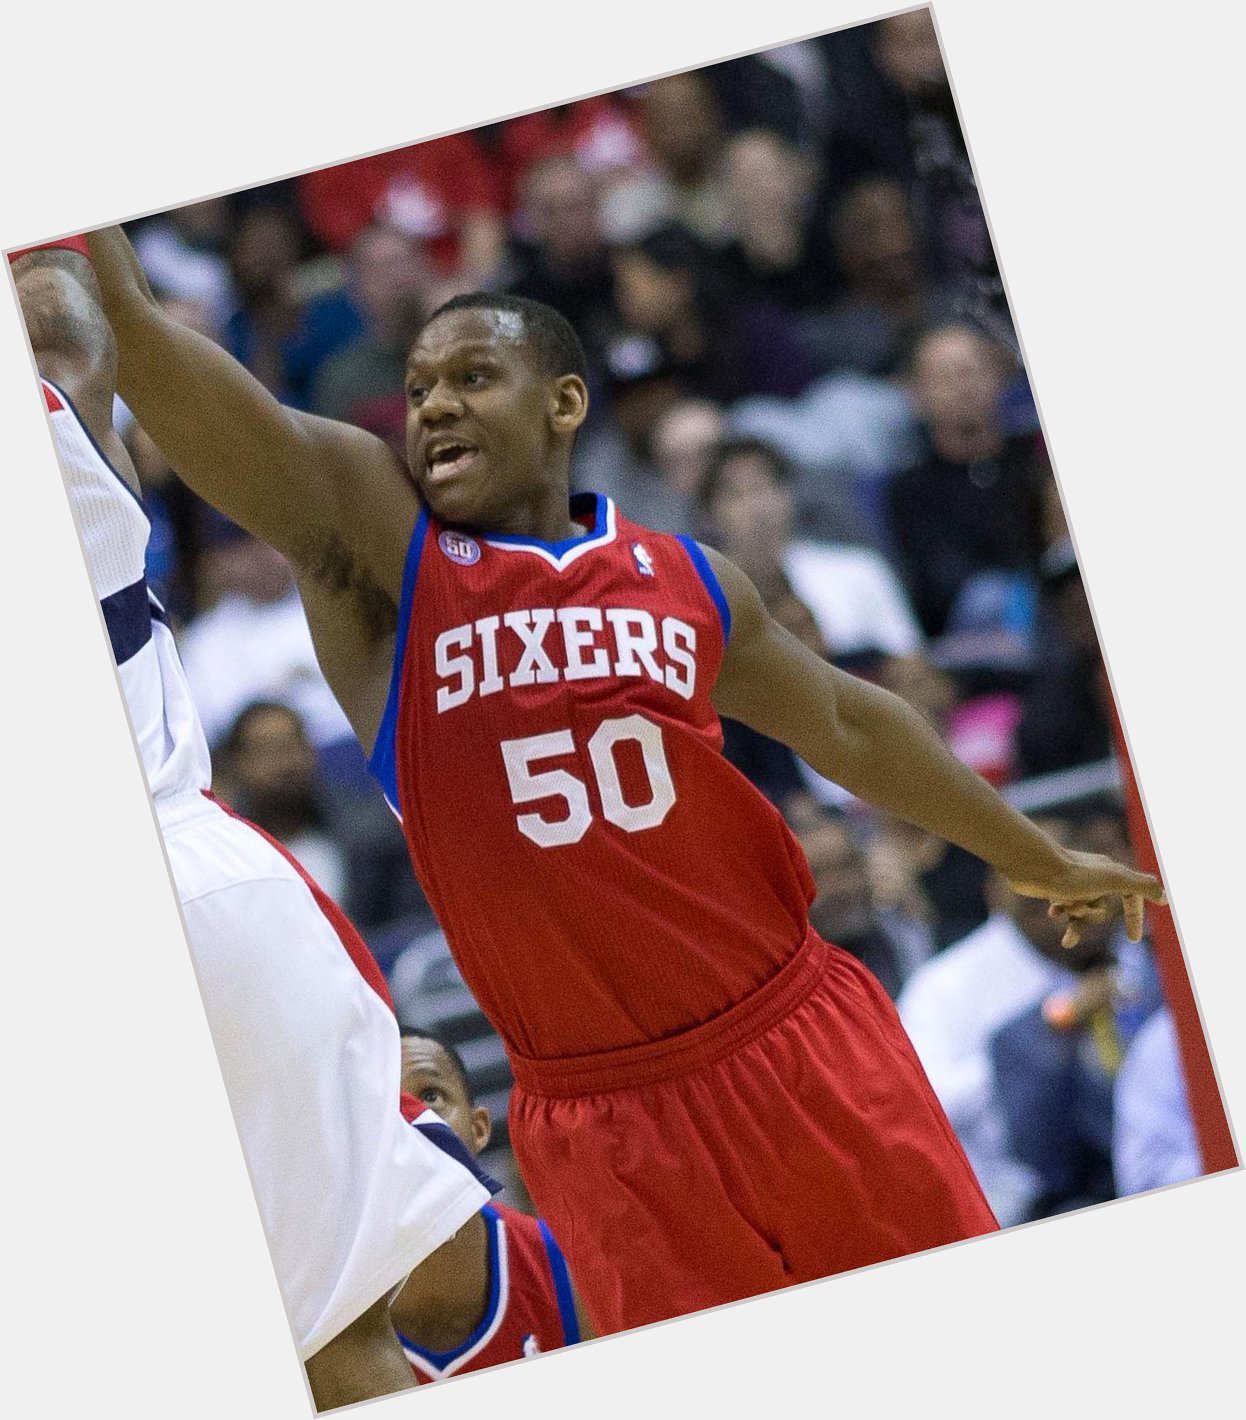 Happy 26th birthday to the one and only Lavoy Allen! Congratulations 